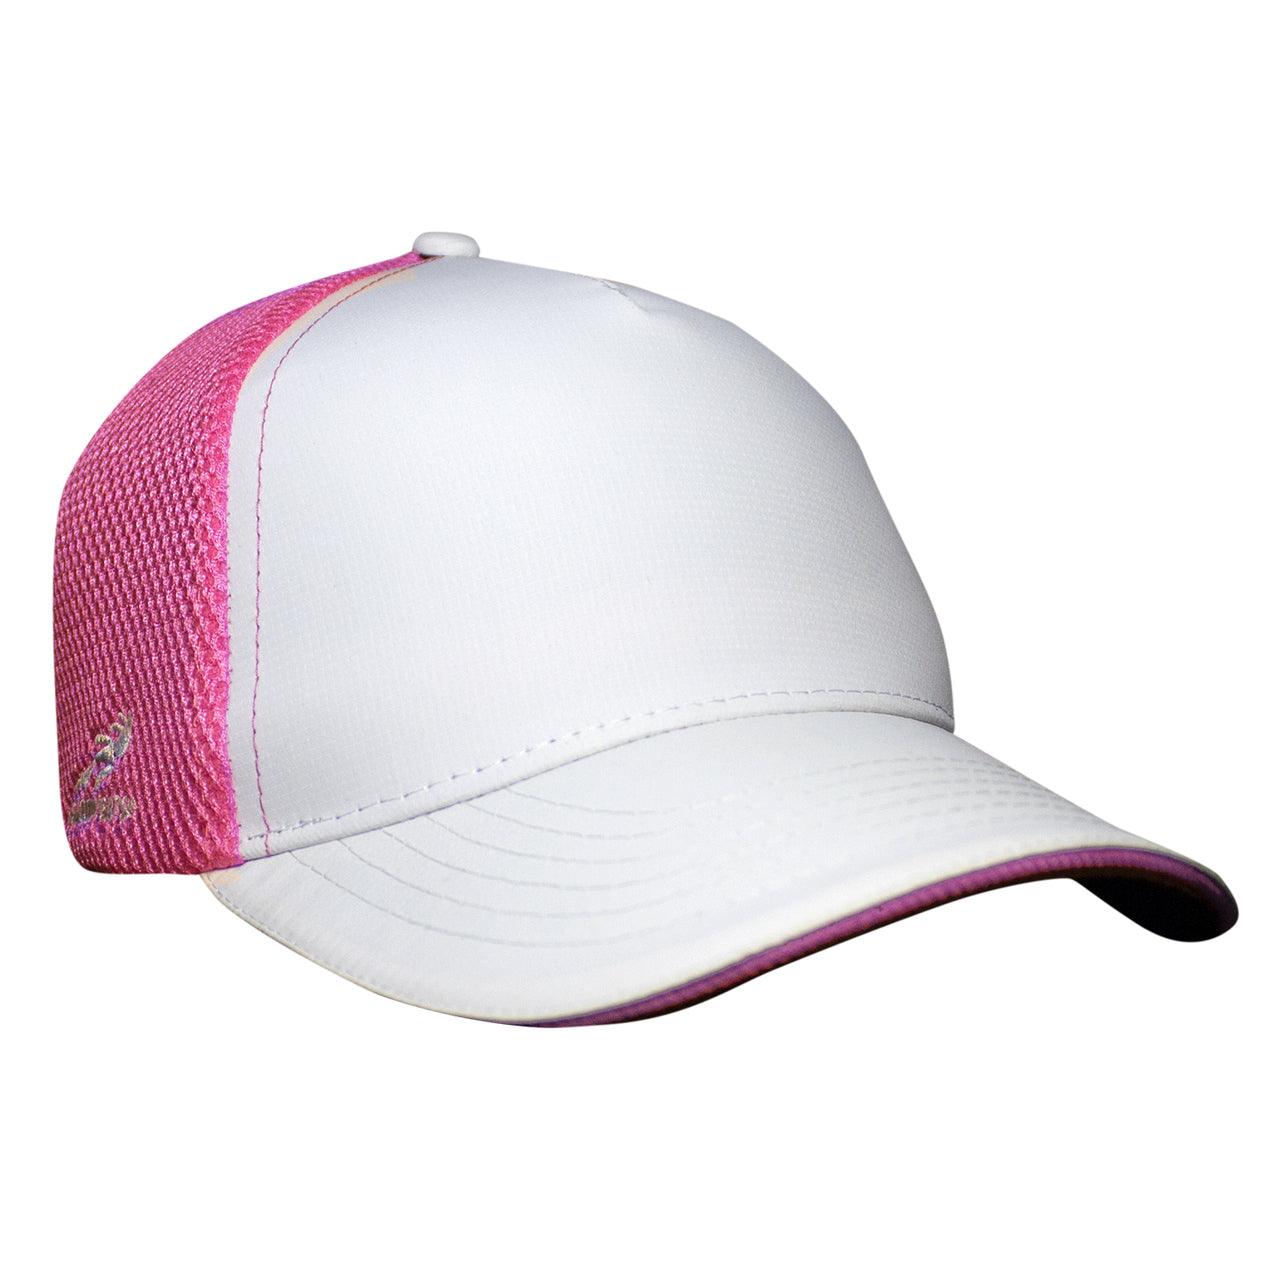 Hot Pink and White Trucker Hat Blank